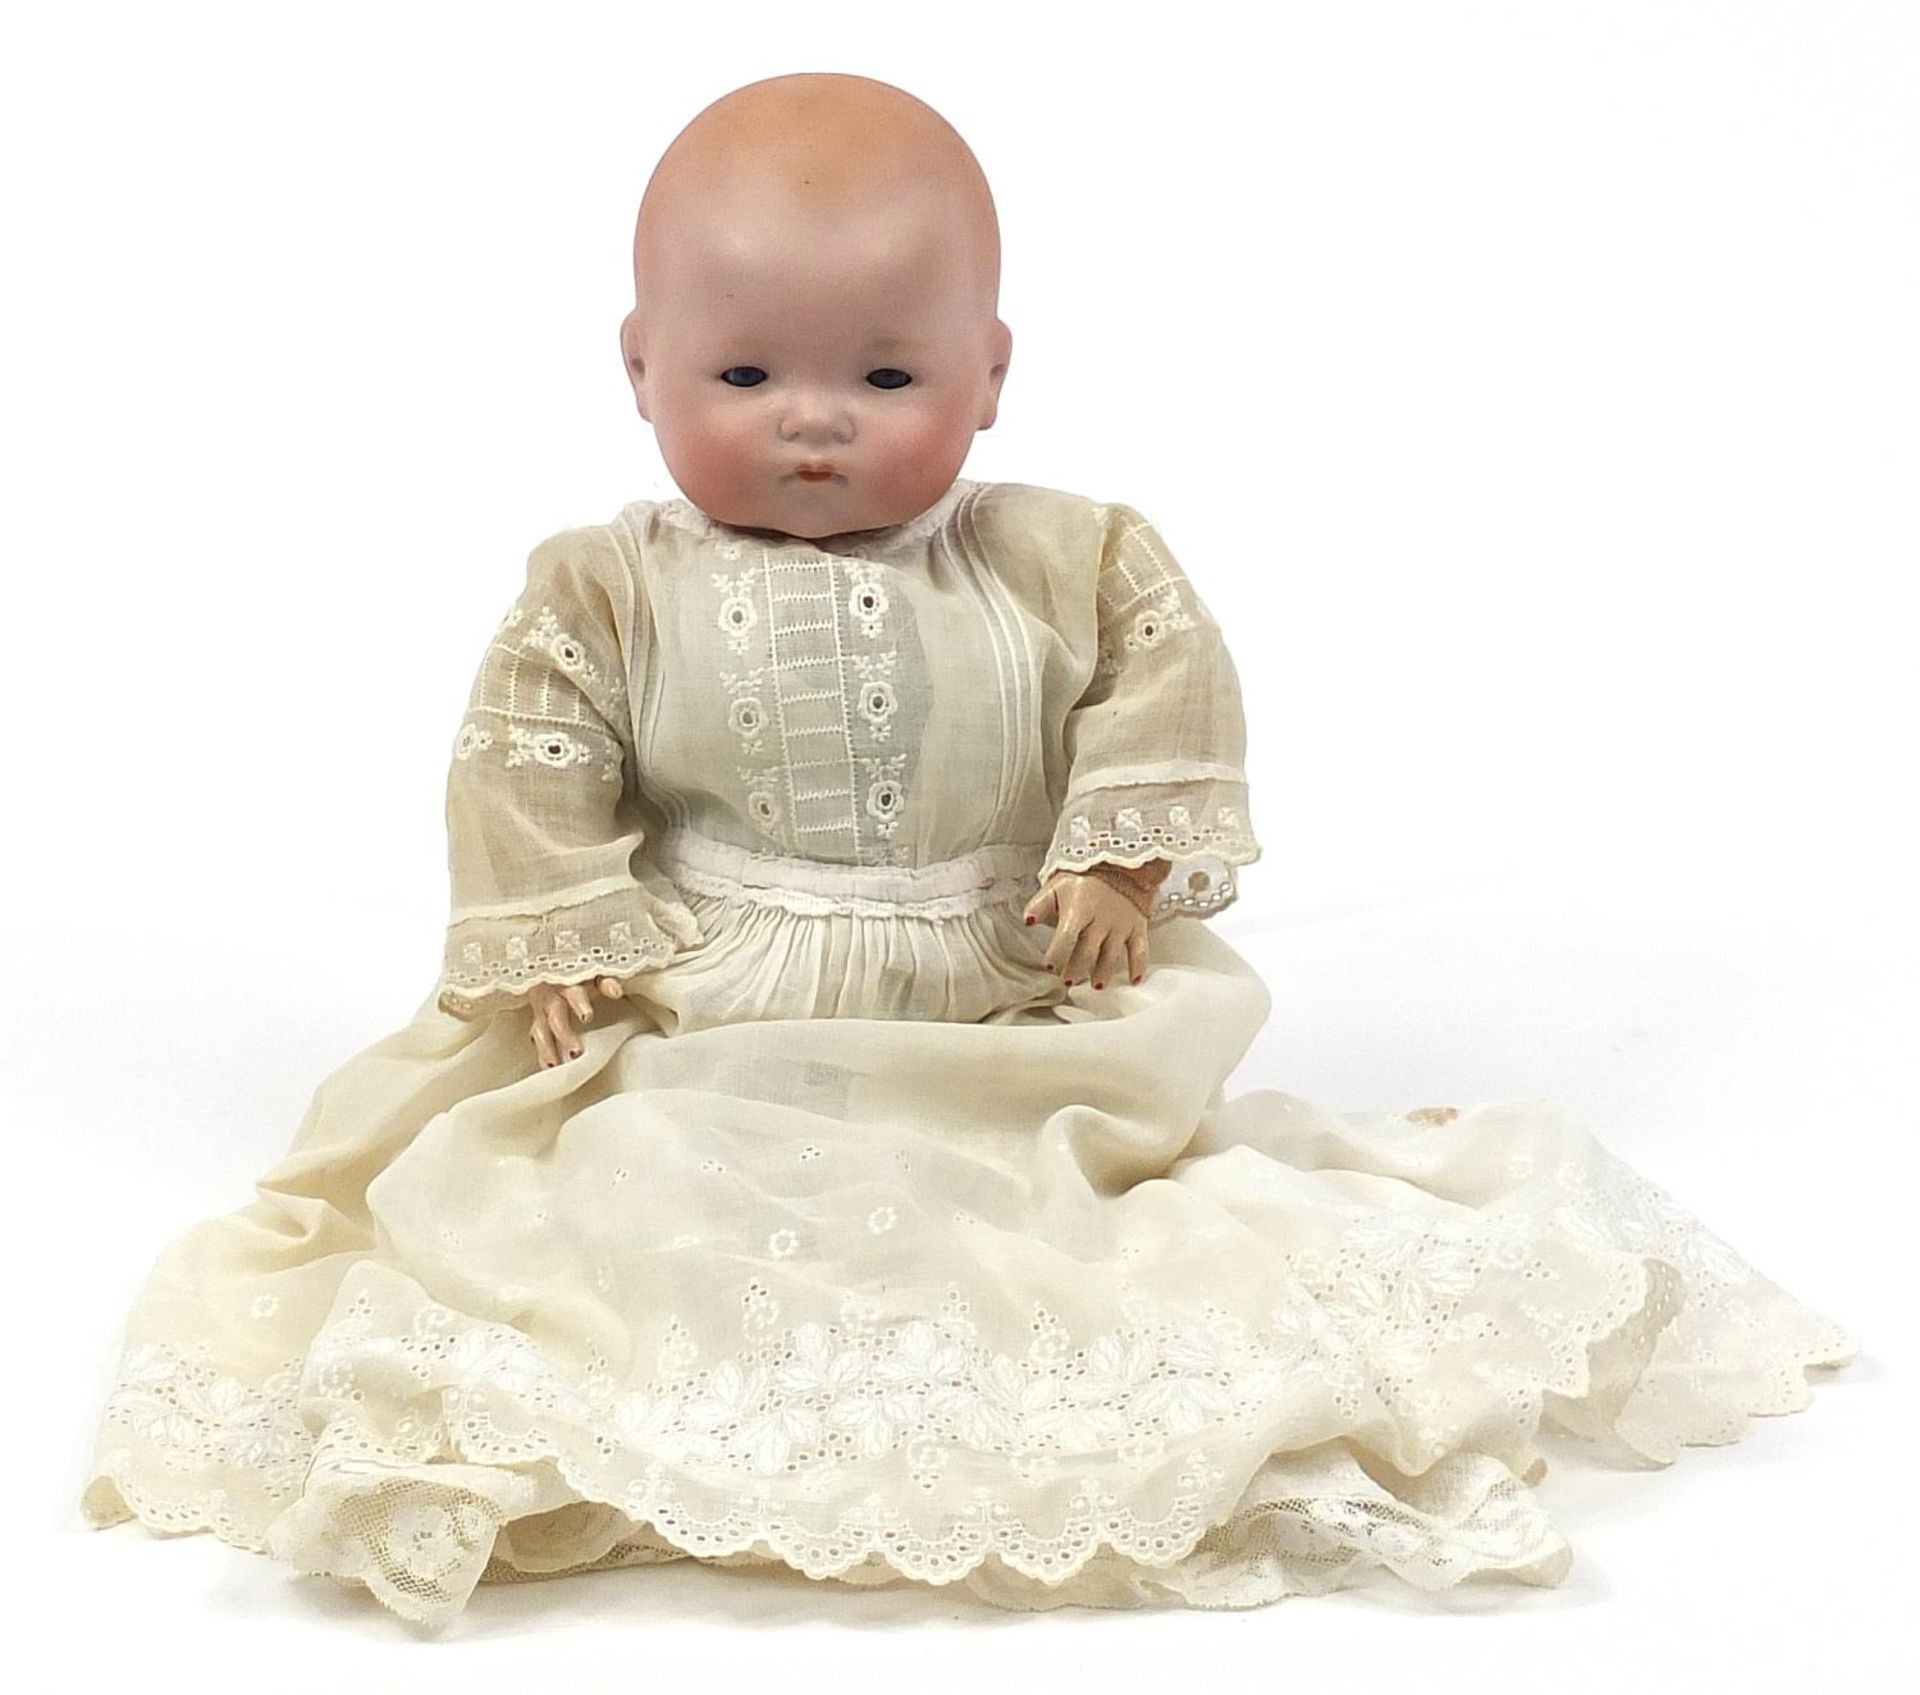 Armand Marseille bisque headed doll numbered 341/4 to the back of the head, 40cm high